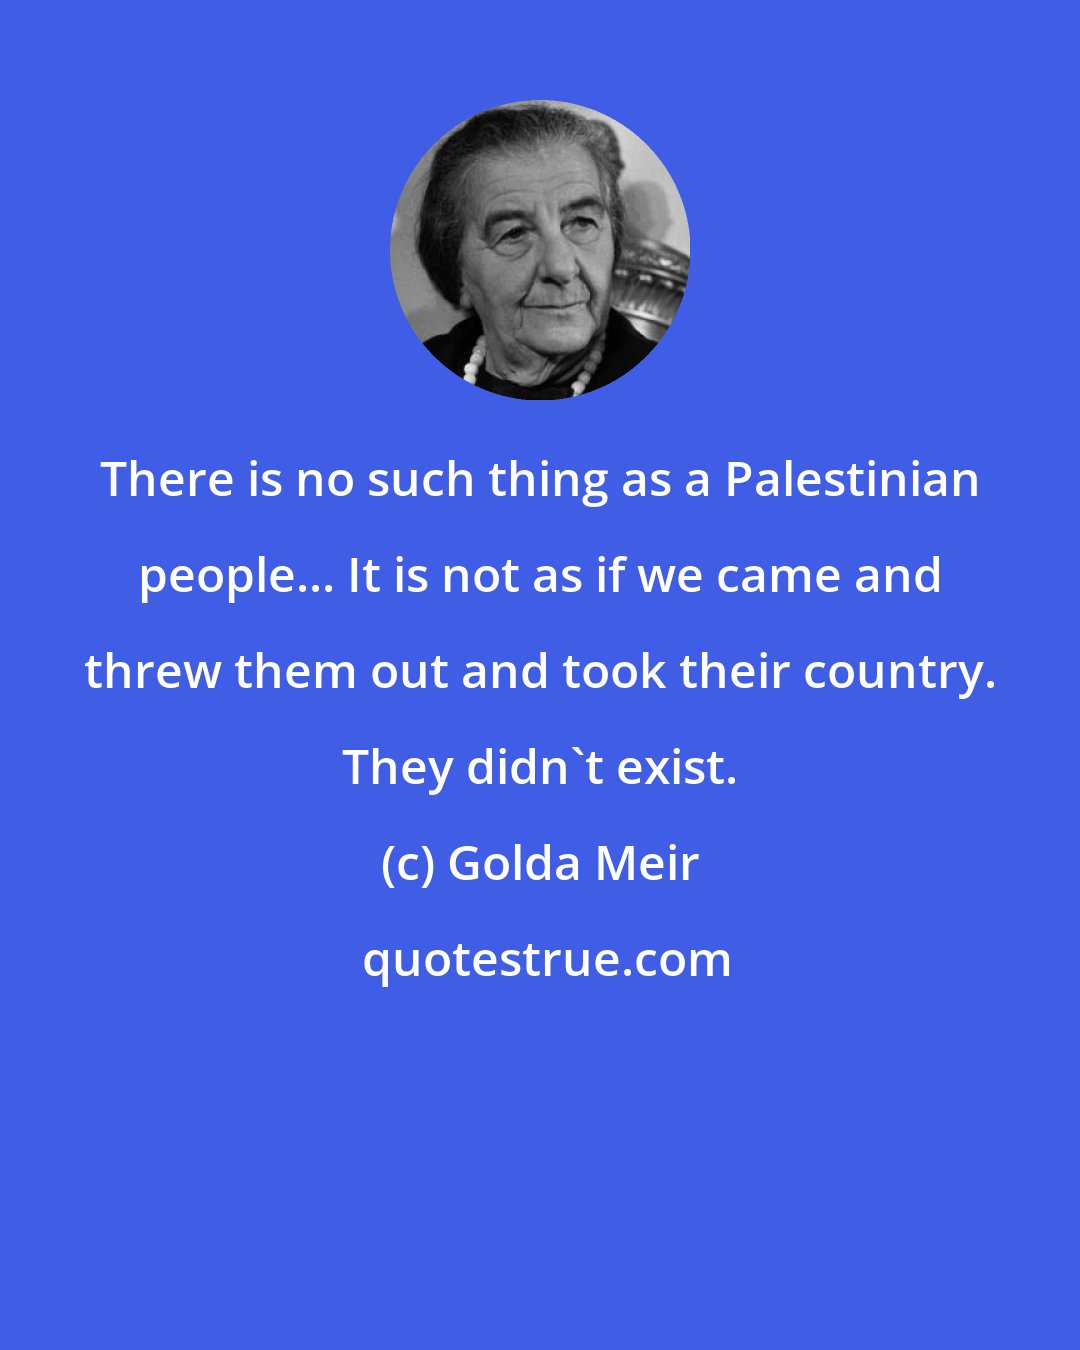 Golda Meir: There is no such thing as a Palestinian people... It is not as if we came and threw them out and took their country. They didn't exist.